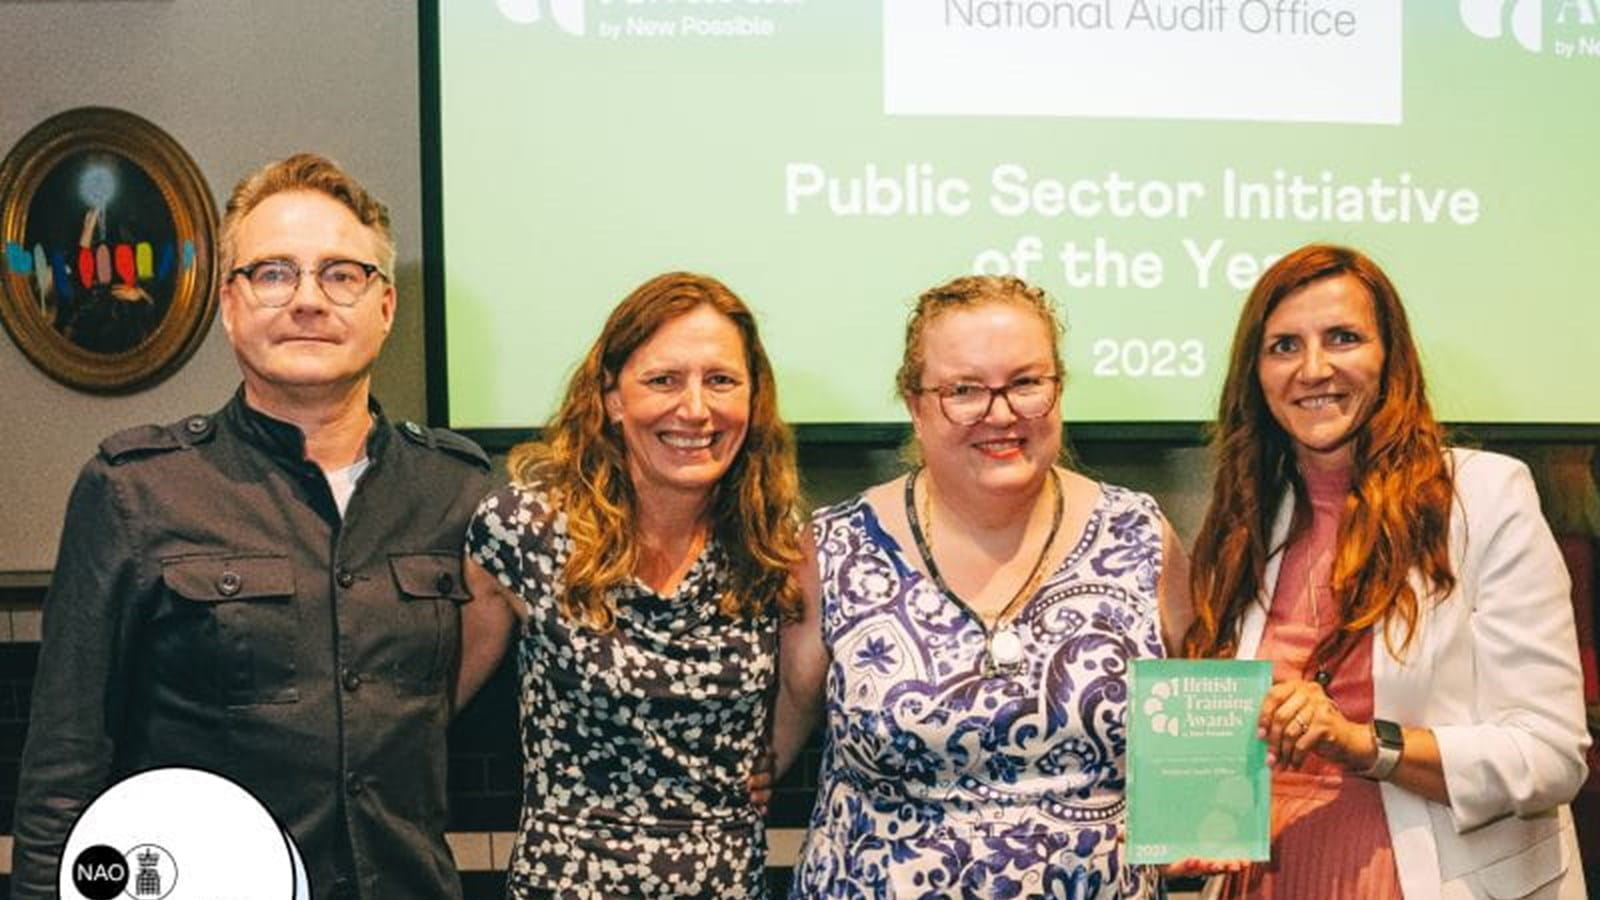 The National Audit Office team winning Public Sector Initiative of the Year at the British Training Awards 2023. (From left: Steve Mirfin, Senior Learning and Development Specialist; Corinna Black, Head of Learning Development and Talent; Debbie Edwards, Senior Auditor; and Anna Wydra, Senior Learning Development Specialist) 